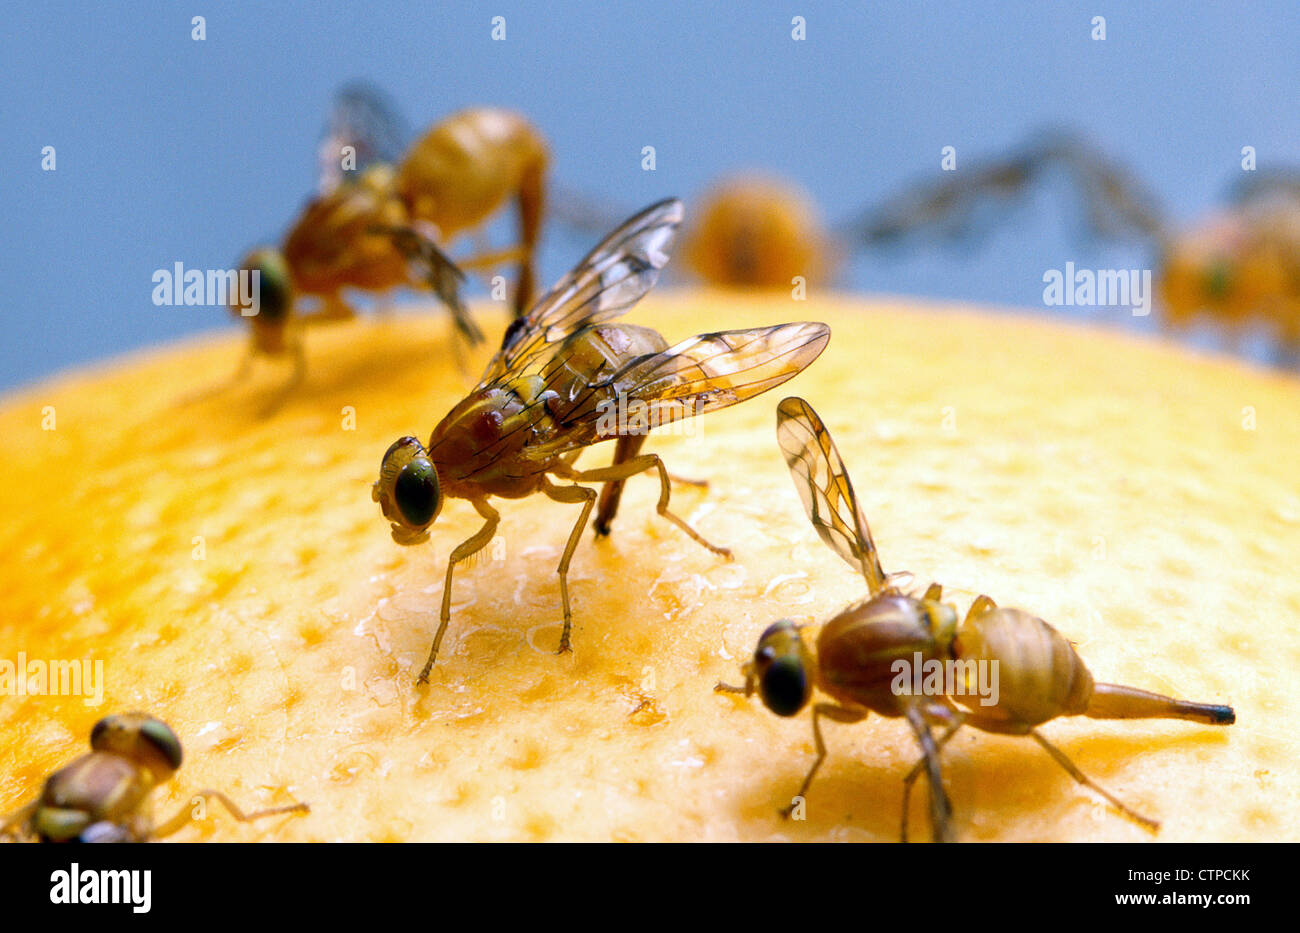 Female Mexican fruit flies Stock Photo